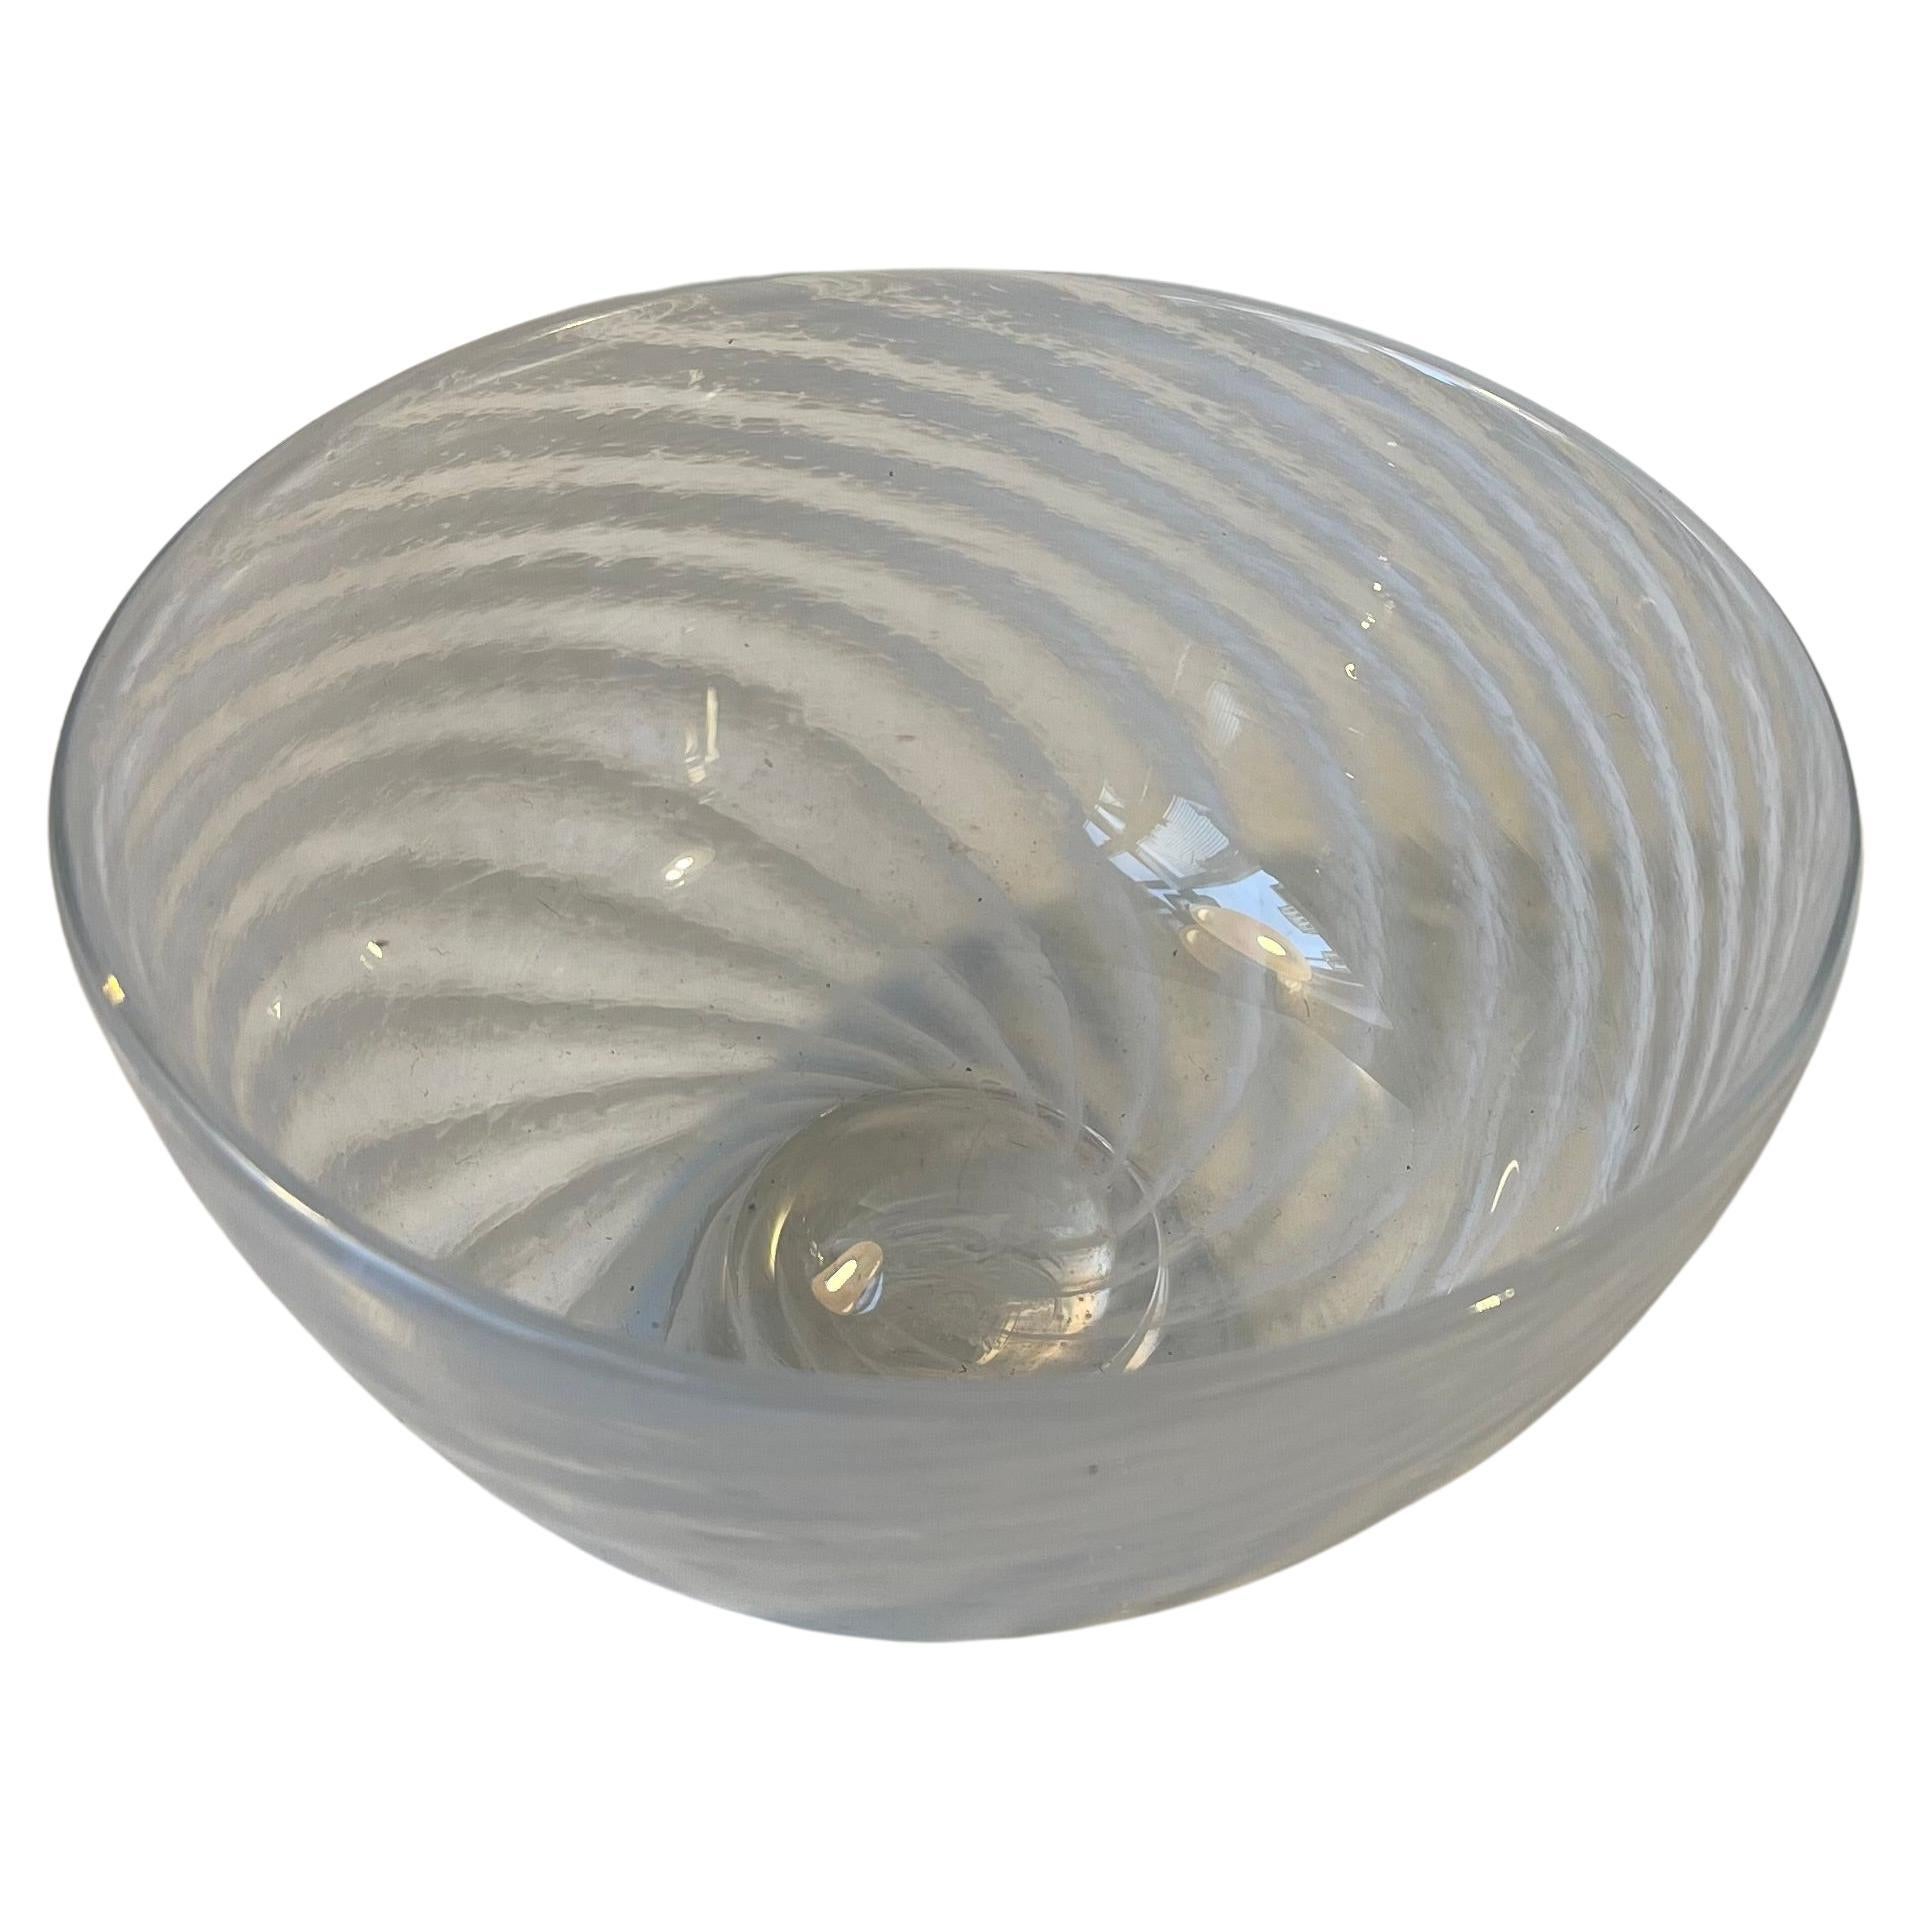 Footed Murano Art Glass Bowl with White Swirls, 1970s For Sale